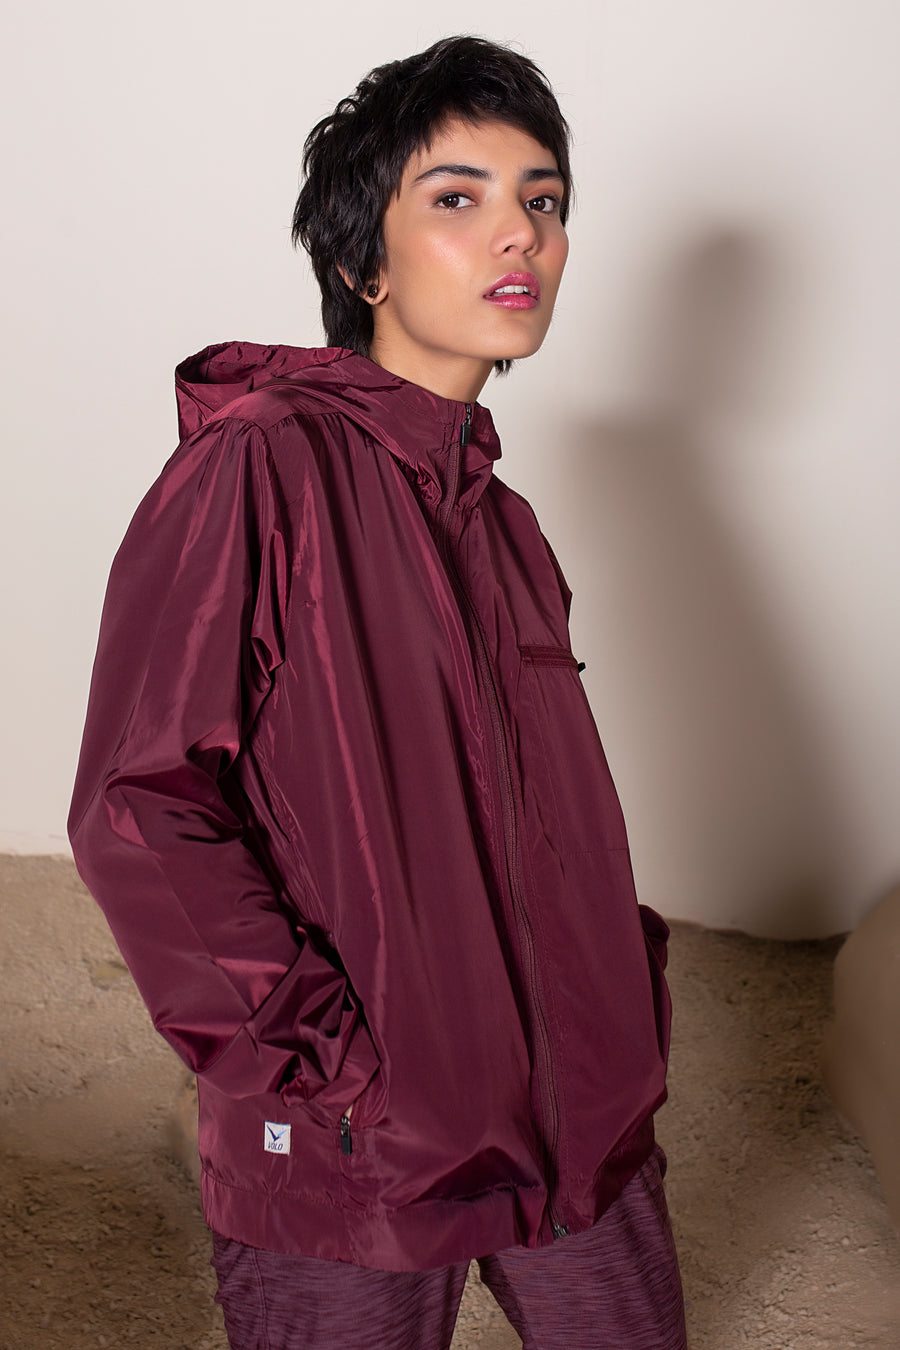 Women's Windansea Jacket in Maroon | VOLO Apparel | The ultimate all year jacket, an ultralight hooded windbreaker, crafted with the revolutionary memory fabric and five pockets. This jacket is full of features, water repellant, three zipper pockets, UPF 50 protection from the sun and tailored fit to look super stylish while being ready for any adventure.